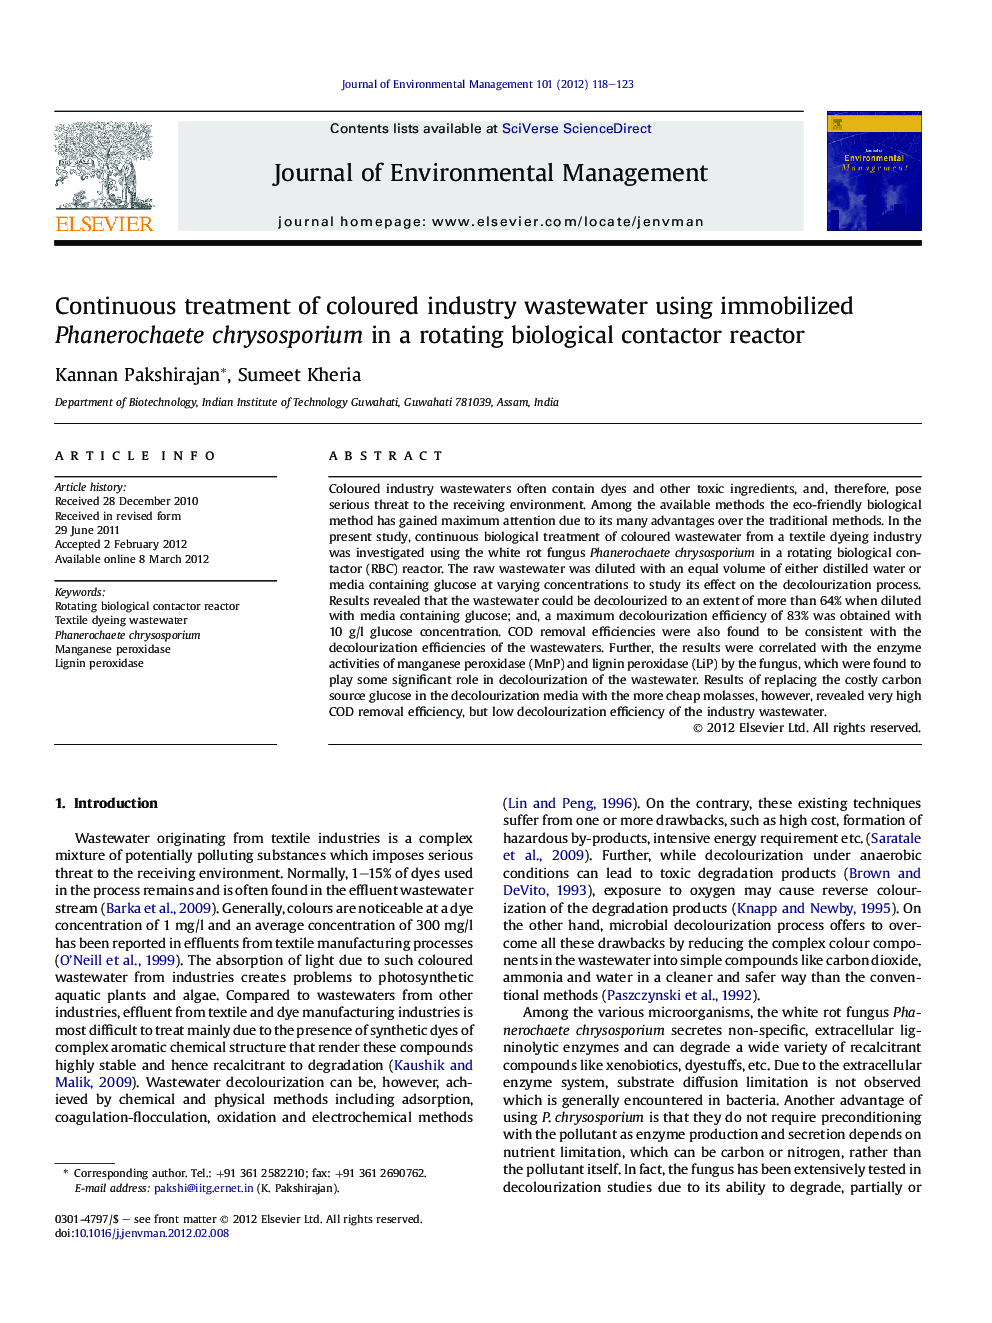 Continuous treatment of coloured industry wastewater using immobilized Phanerochaete chrysosporium in a rotating biological contactor reactor